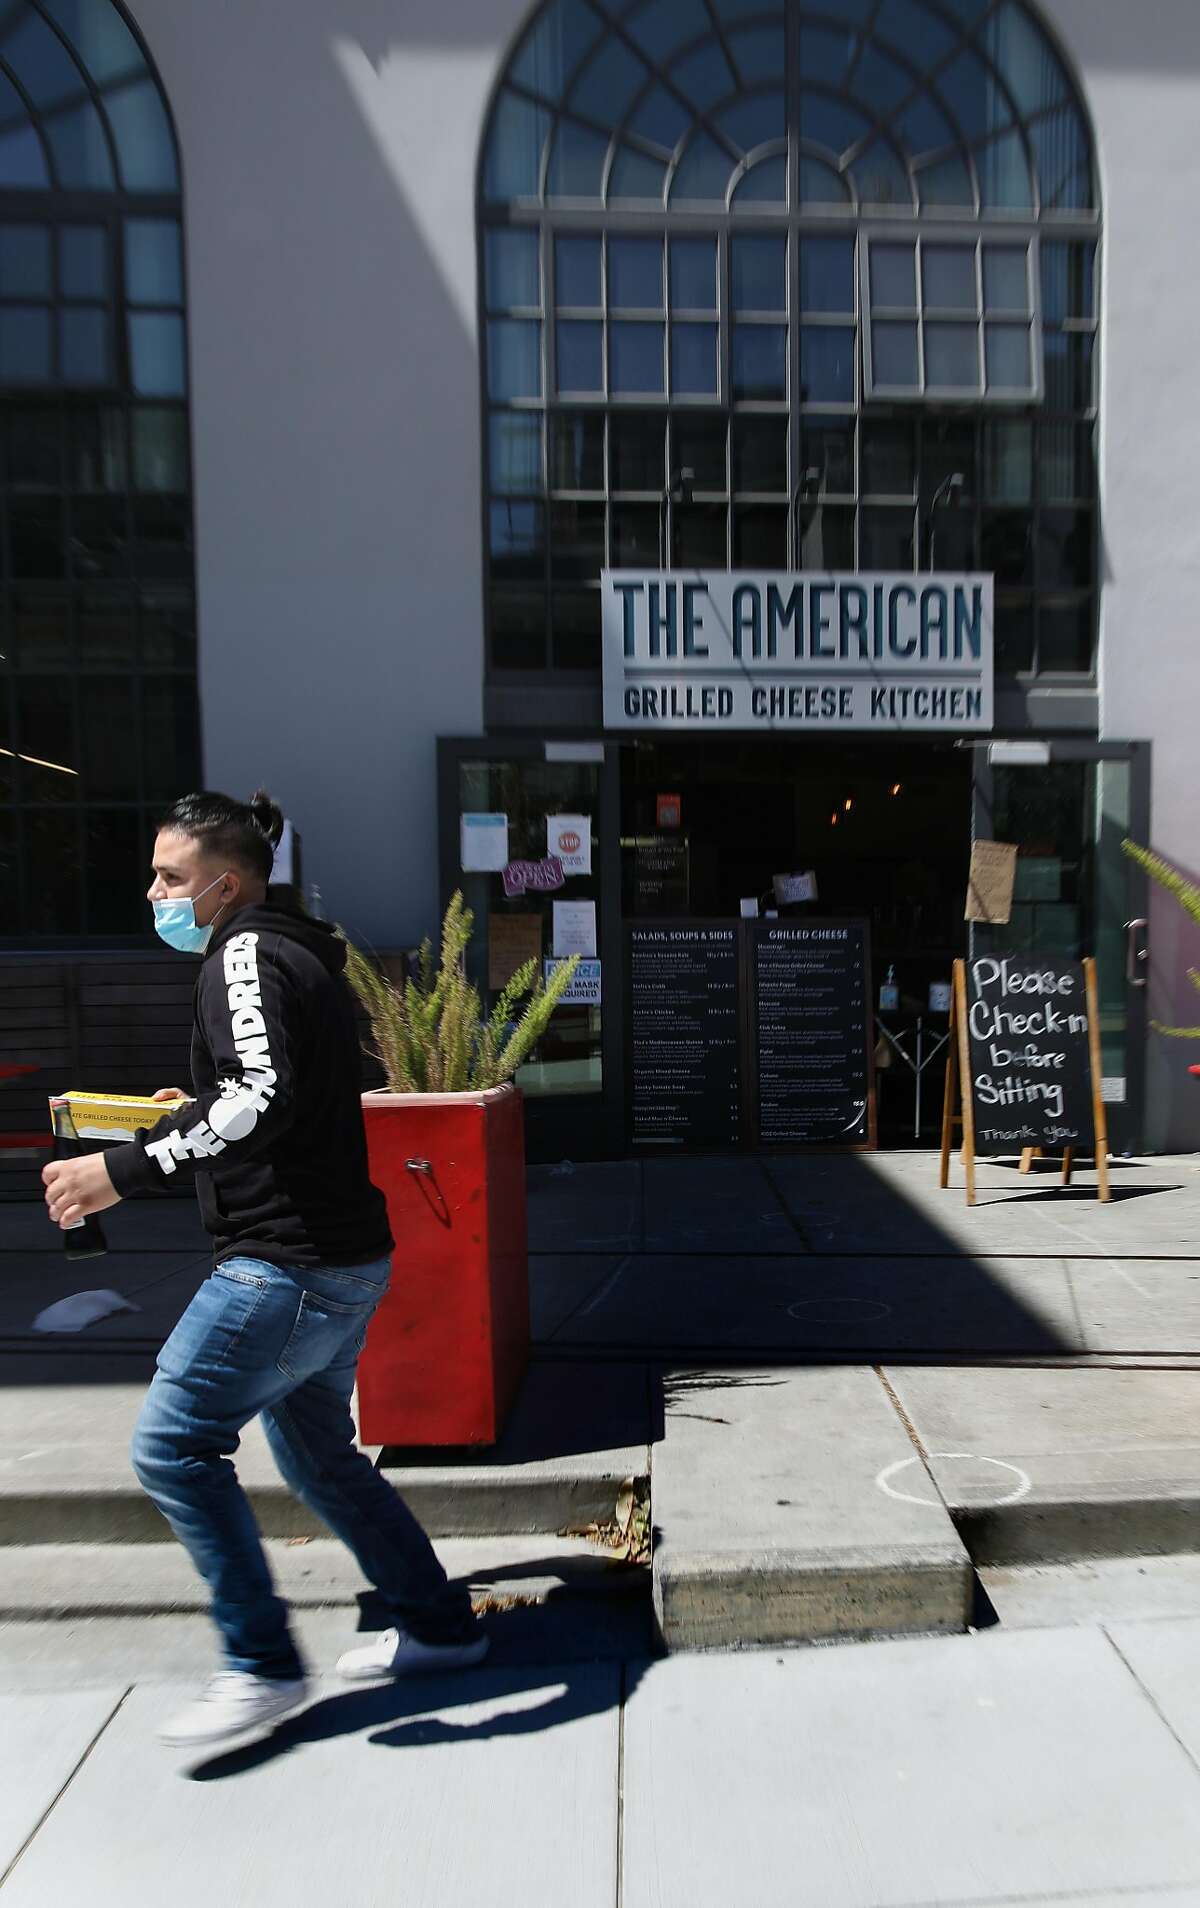 A customer picks up an order at The American Grilled Cheese Kitchen on Tuesday, July 7, 2020, in San Francisco, Calif. Mayor London Breed may announce a change of plans on indoor dining in SF.